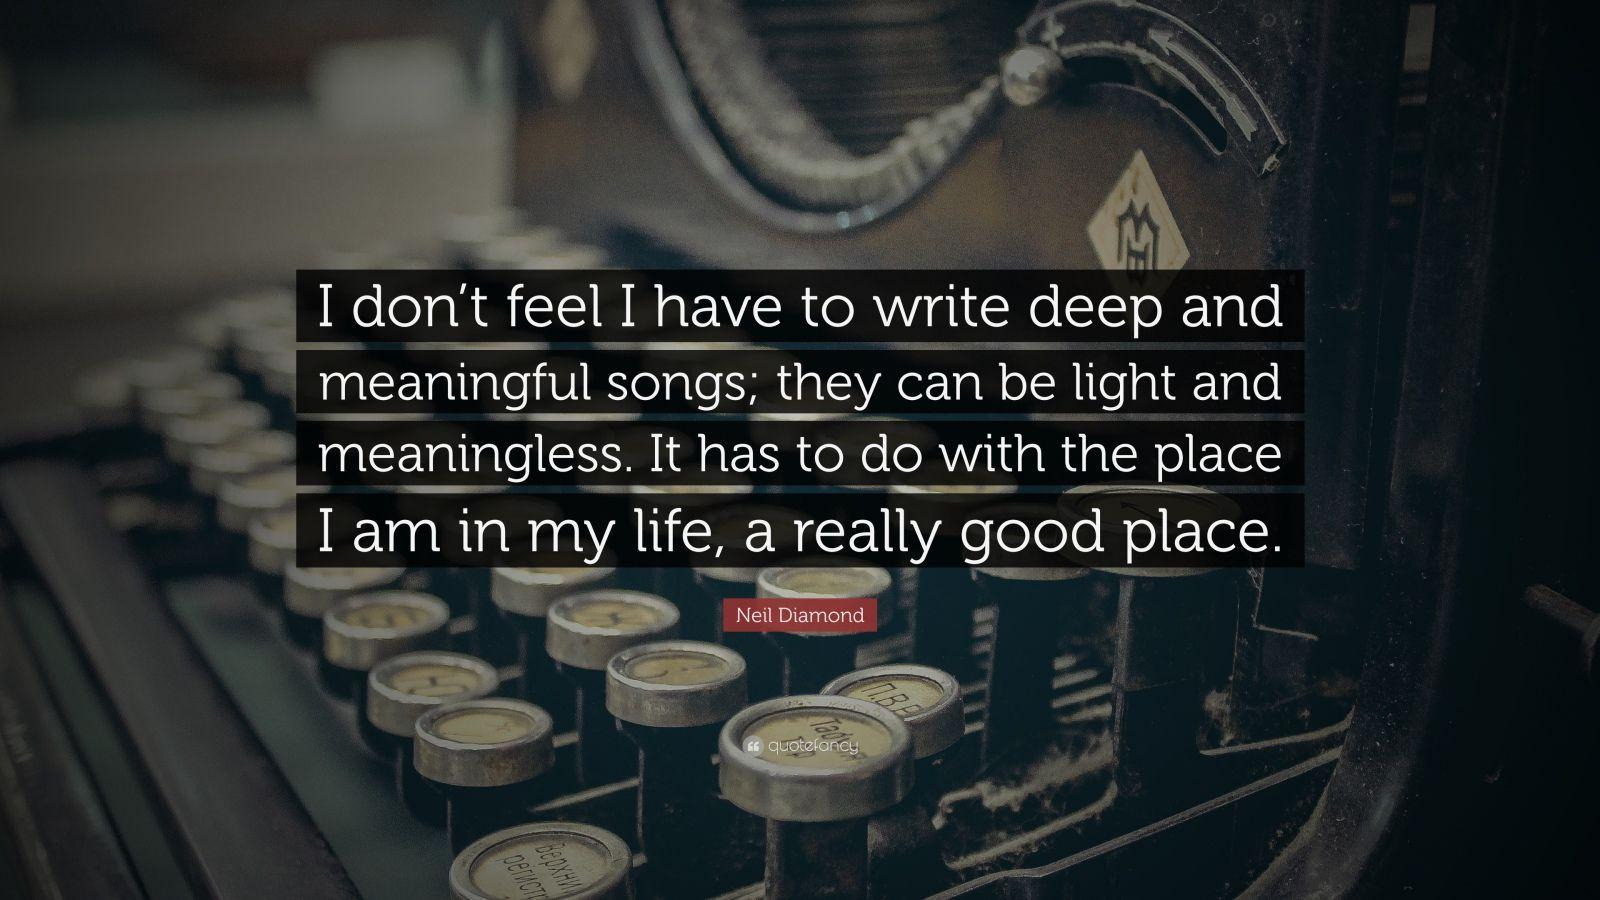 Neil Diamond Quote: “I don't feel I have to write deep